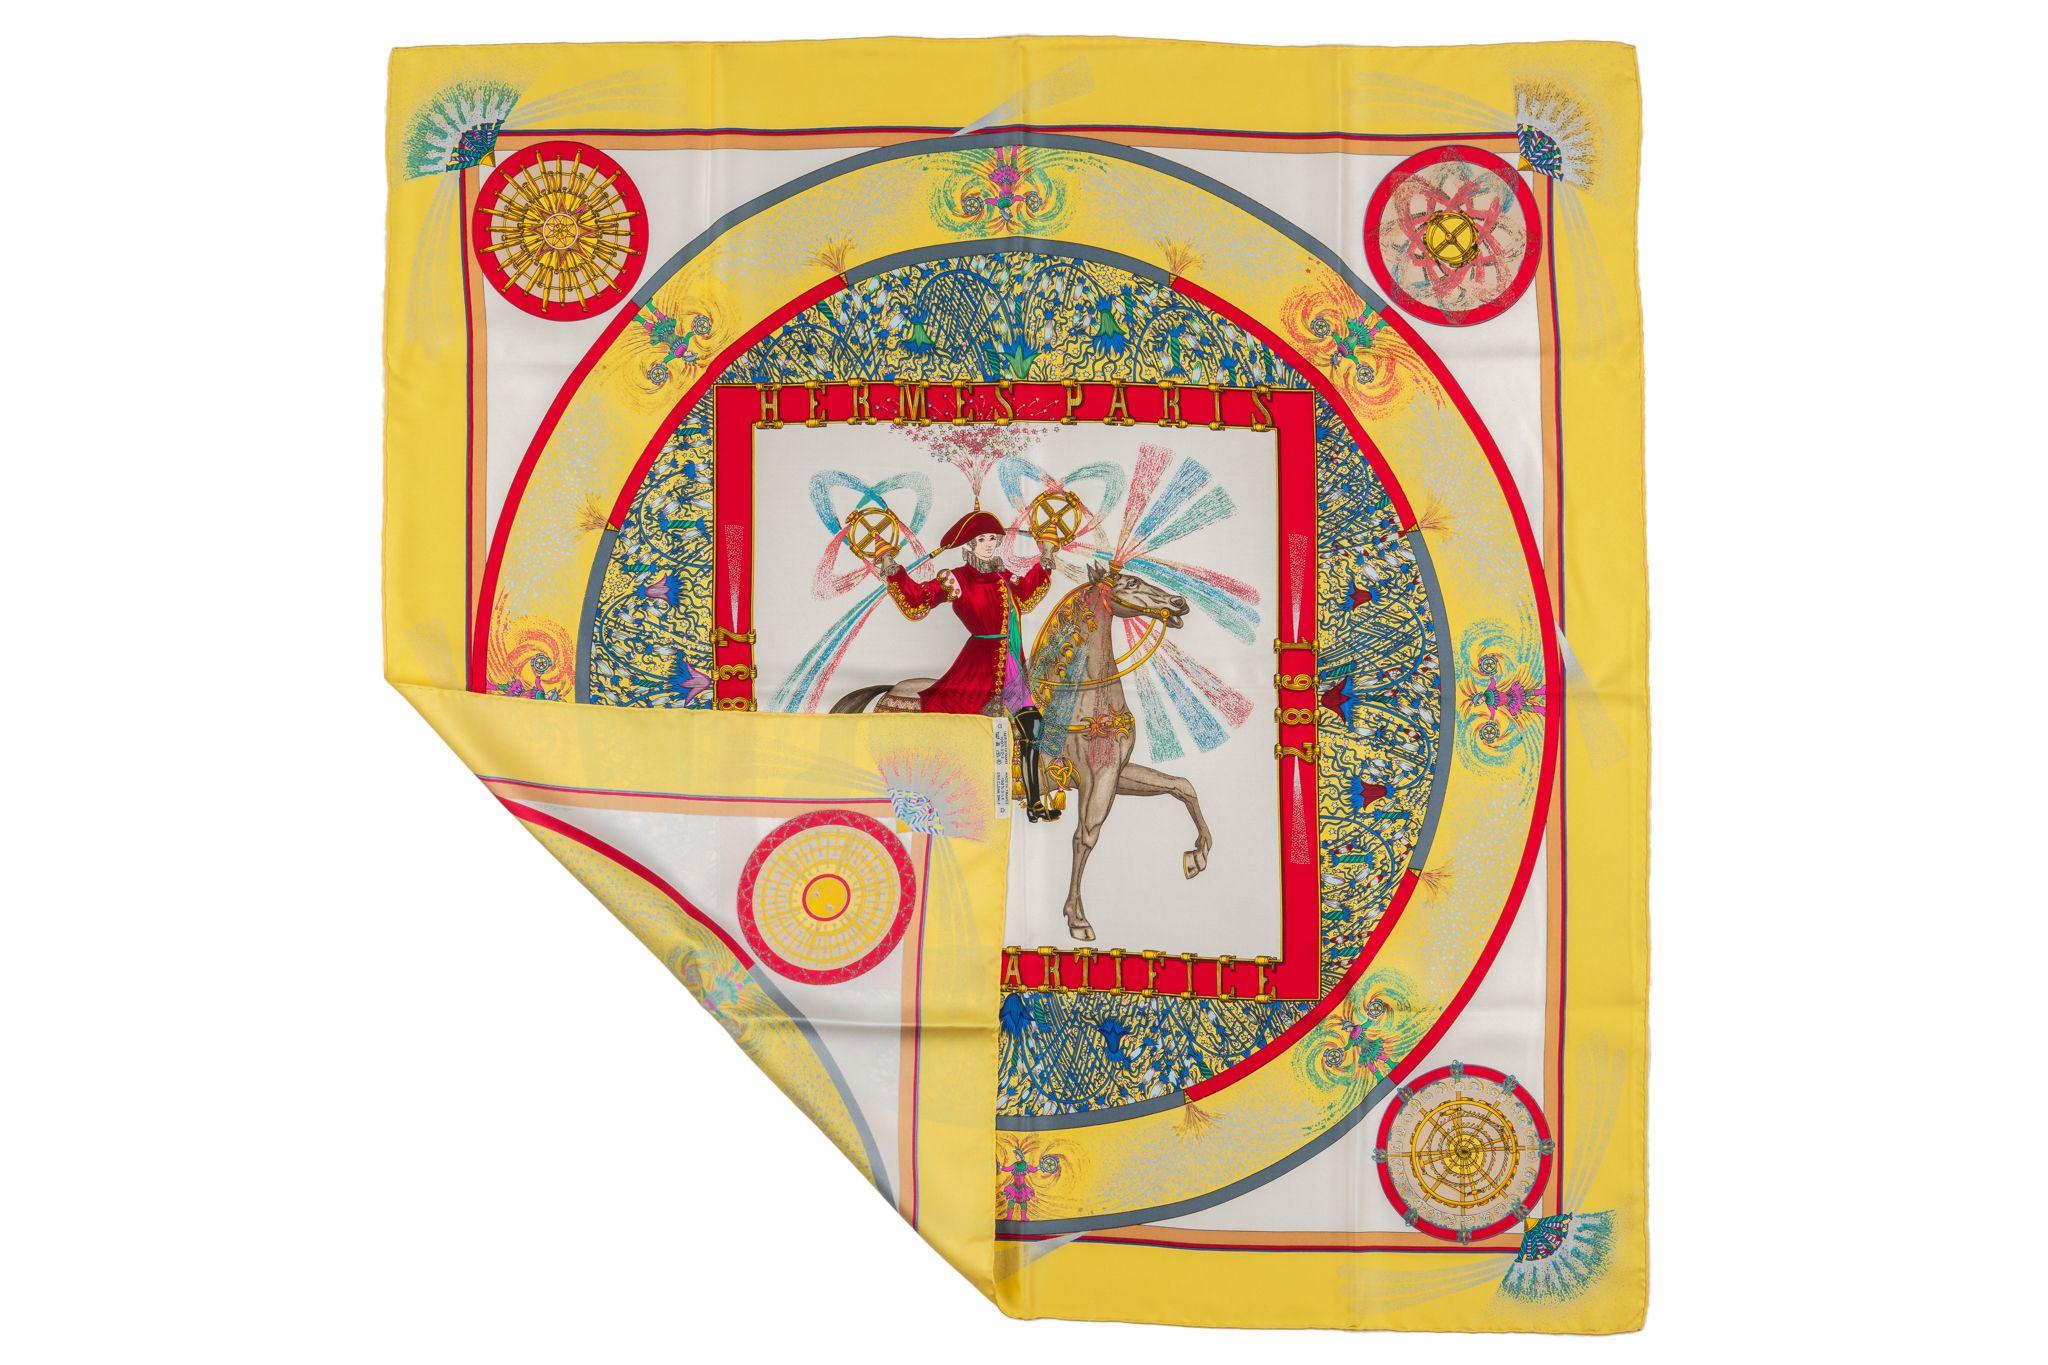 Hermes, Feux D'Artifice, 100% Silk Scarf by Michel Duchene. The scarf is a special issue to celebrate 150th anniversary of Hermes. Features hand rolled hem. Comes with no box.